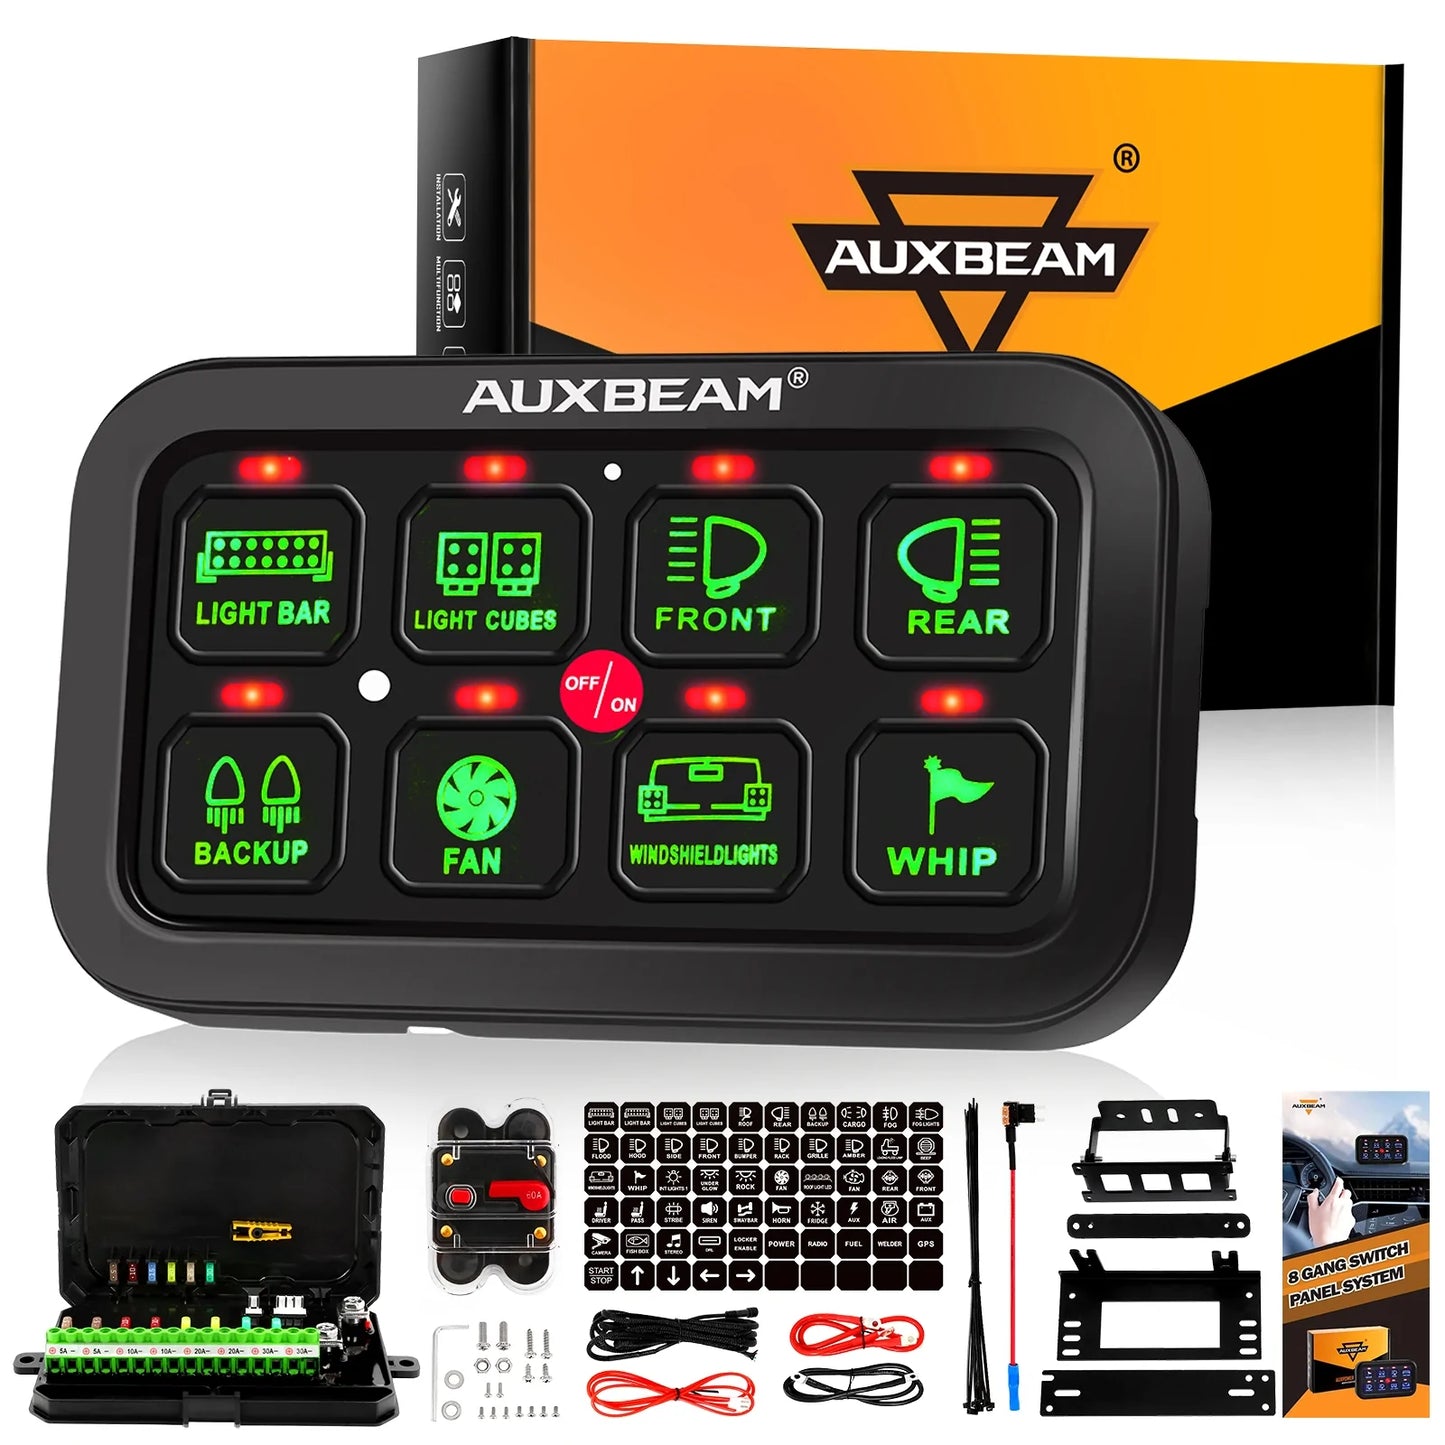 Auxbeam BA80 8 gang multifunction switch panel (blue or green)